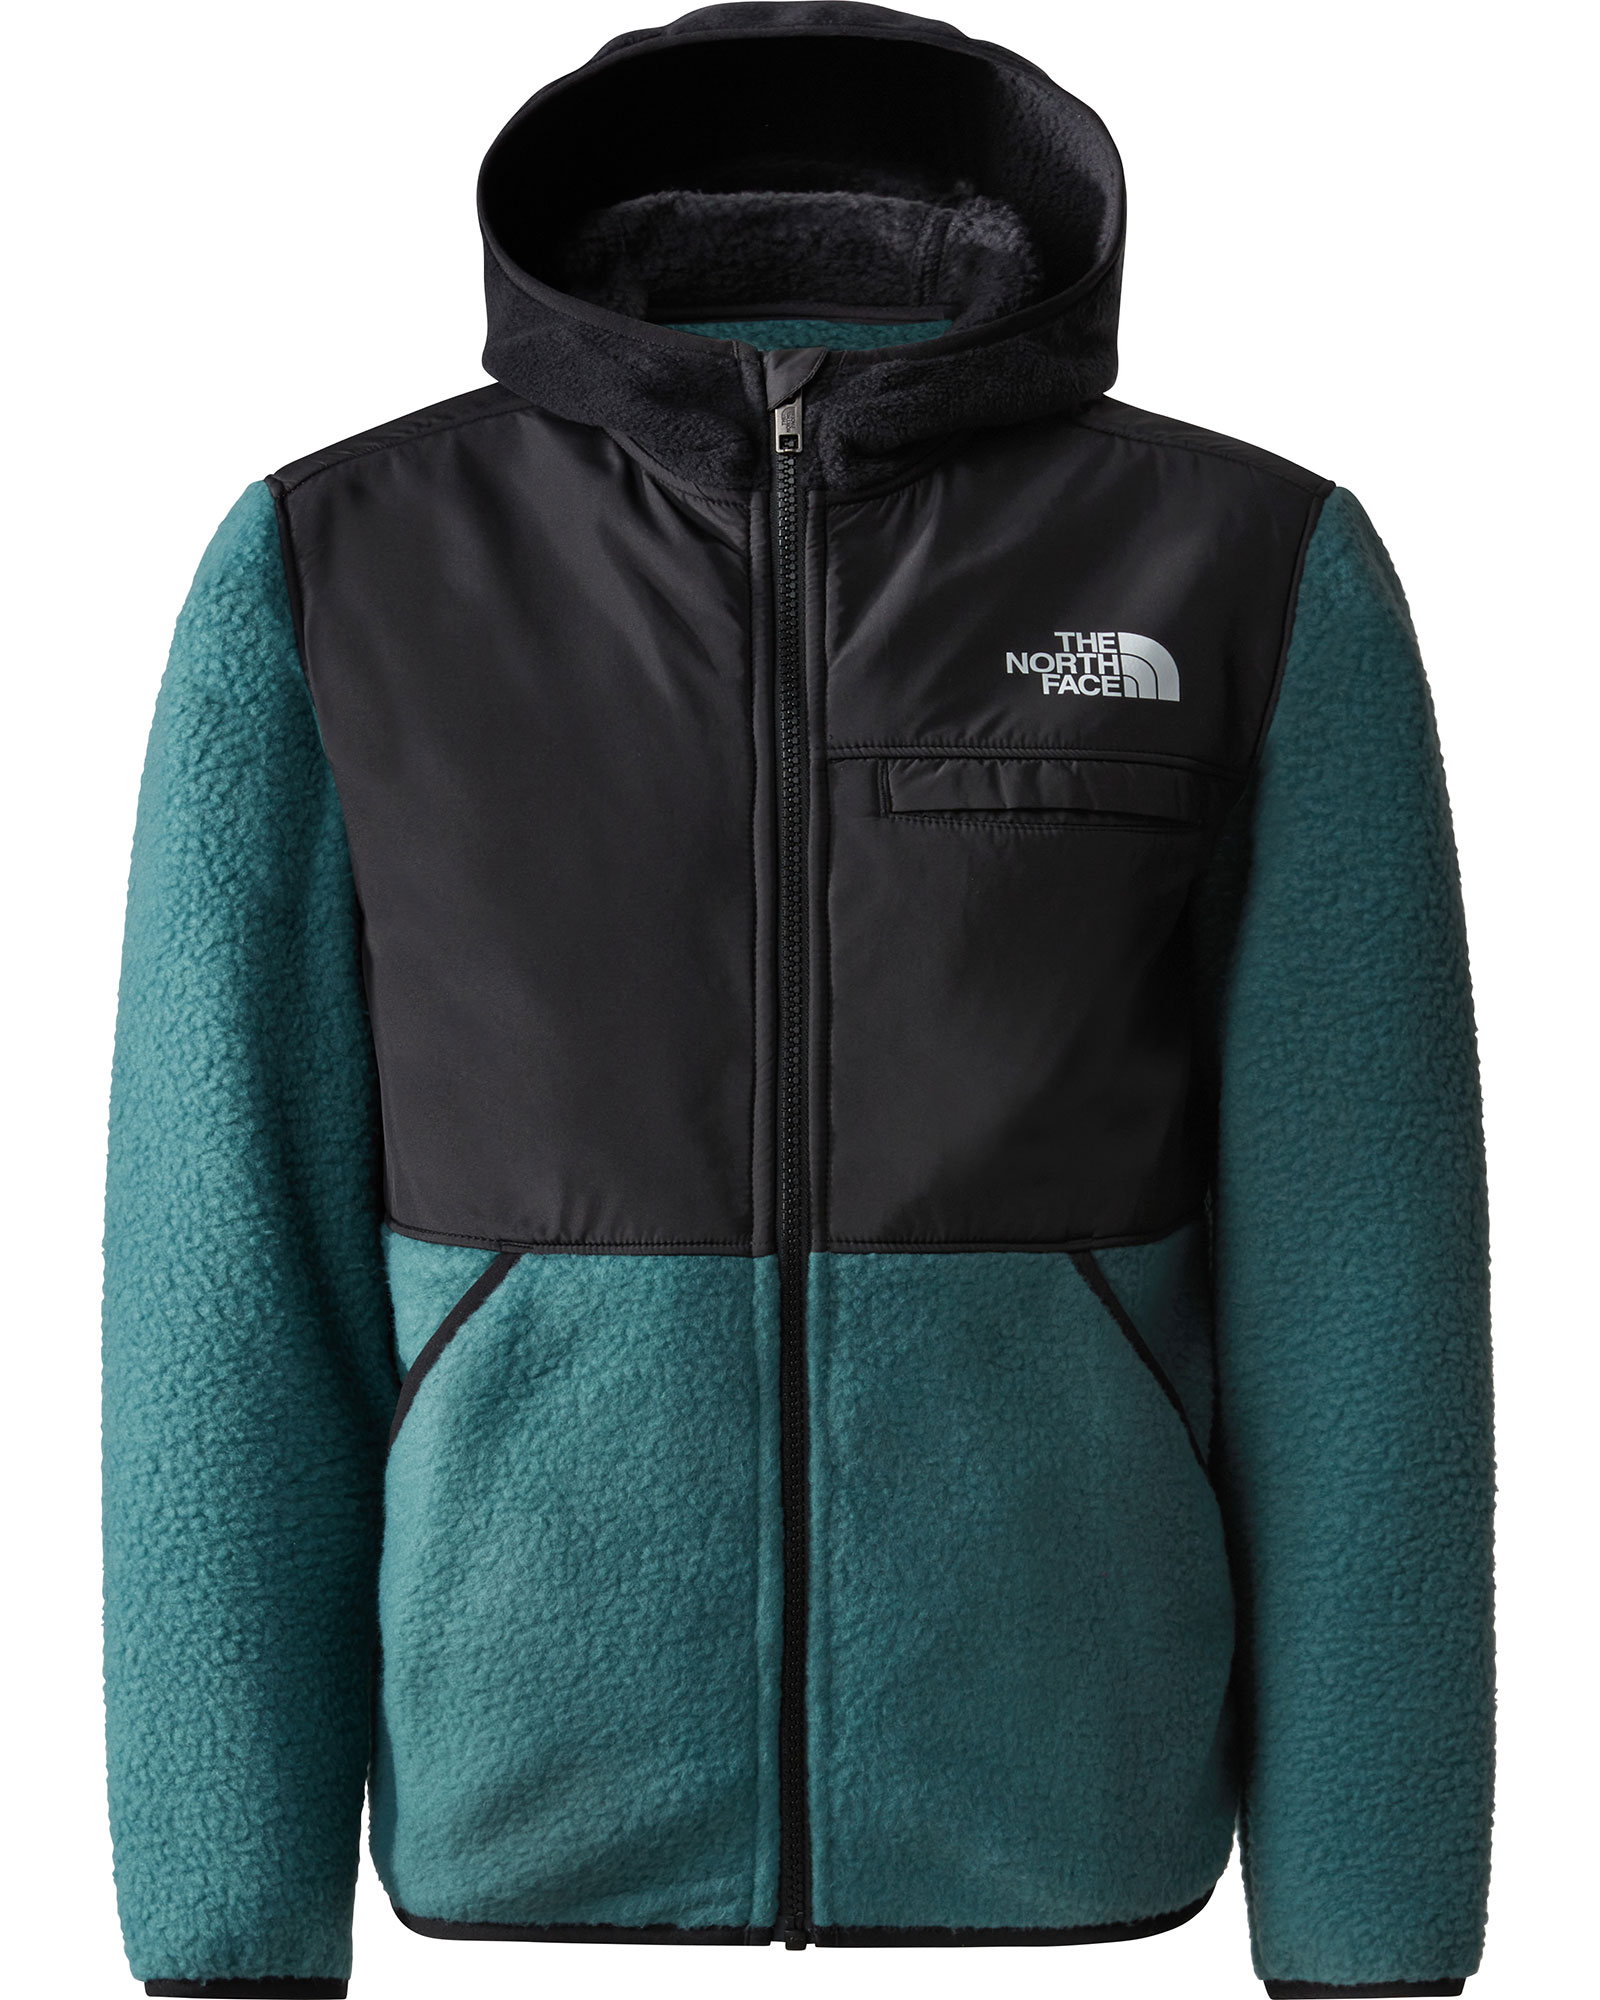 The North Face Boy’s Forrest Fleece Full Zip Hooded Jacket